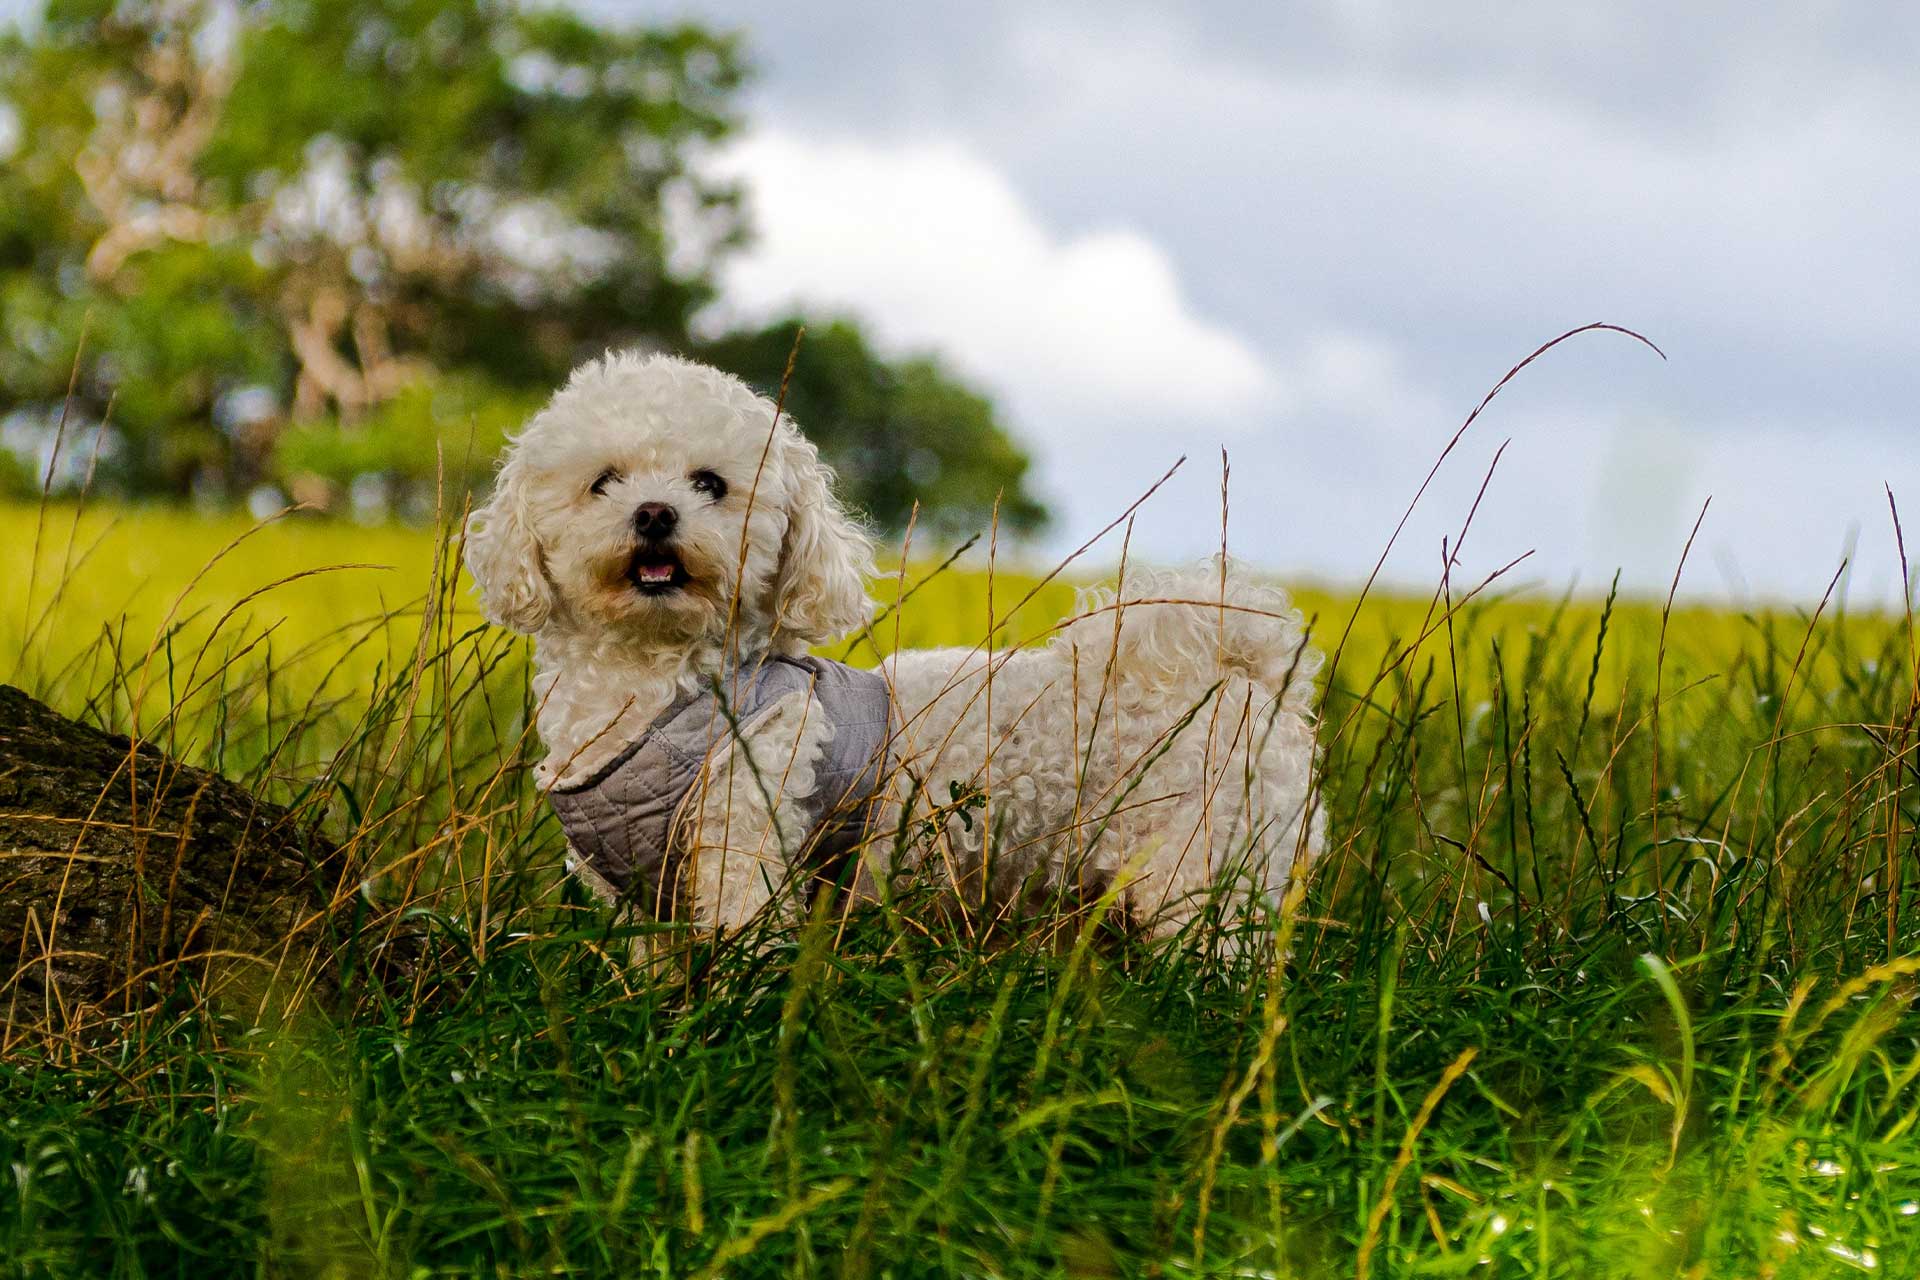 full grown white and tan bichpoo dog wearing a harness while in a grass field